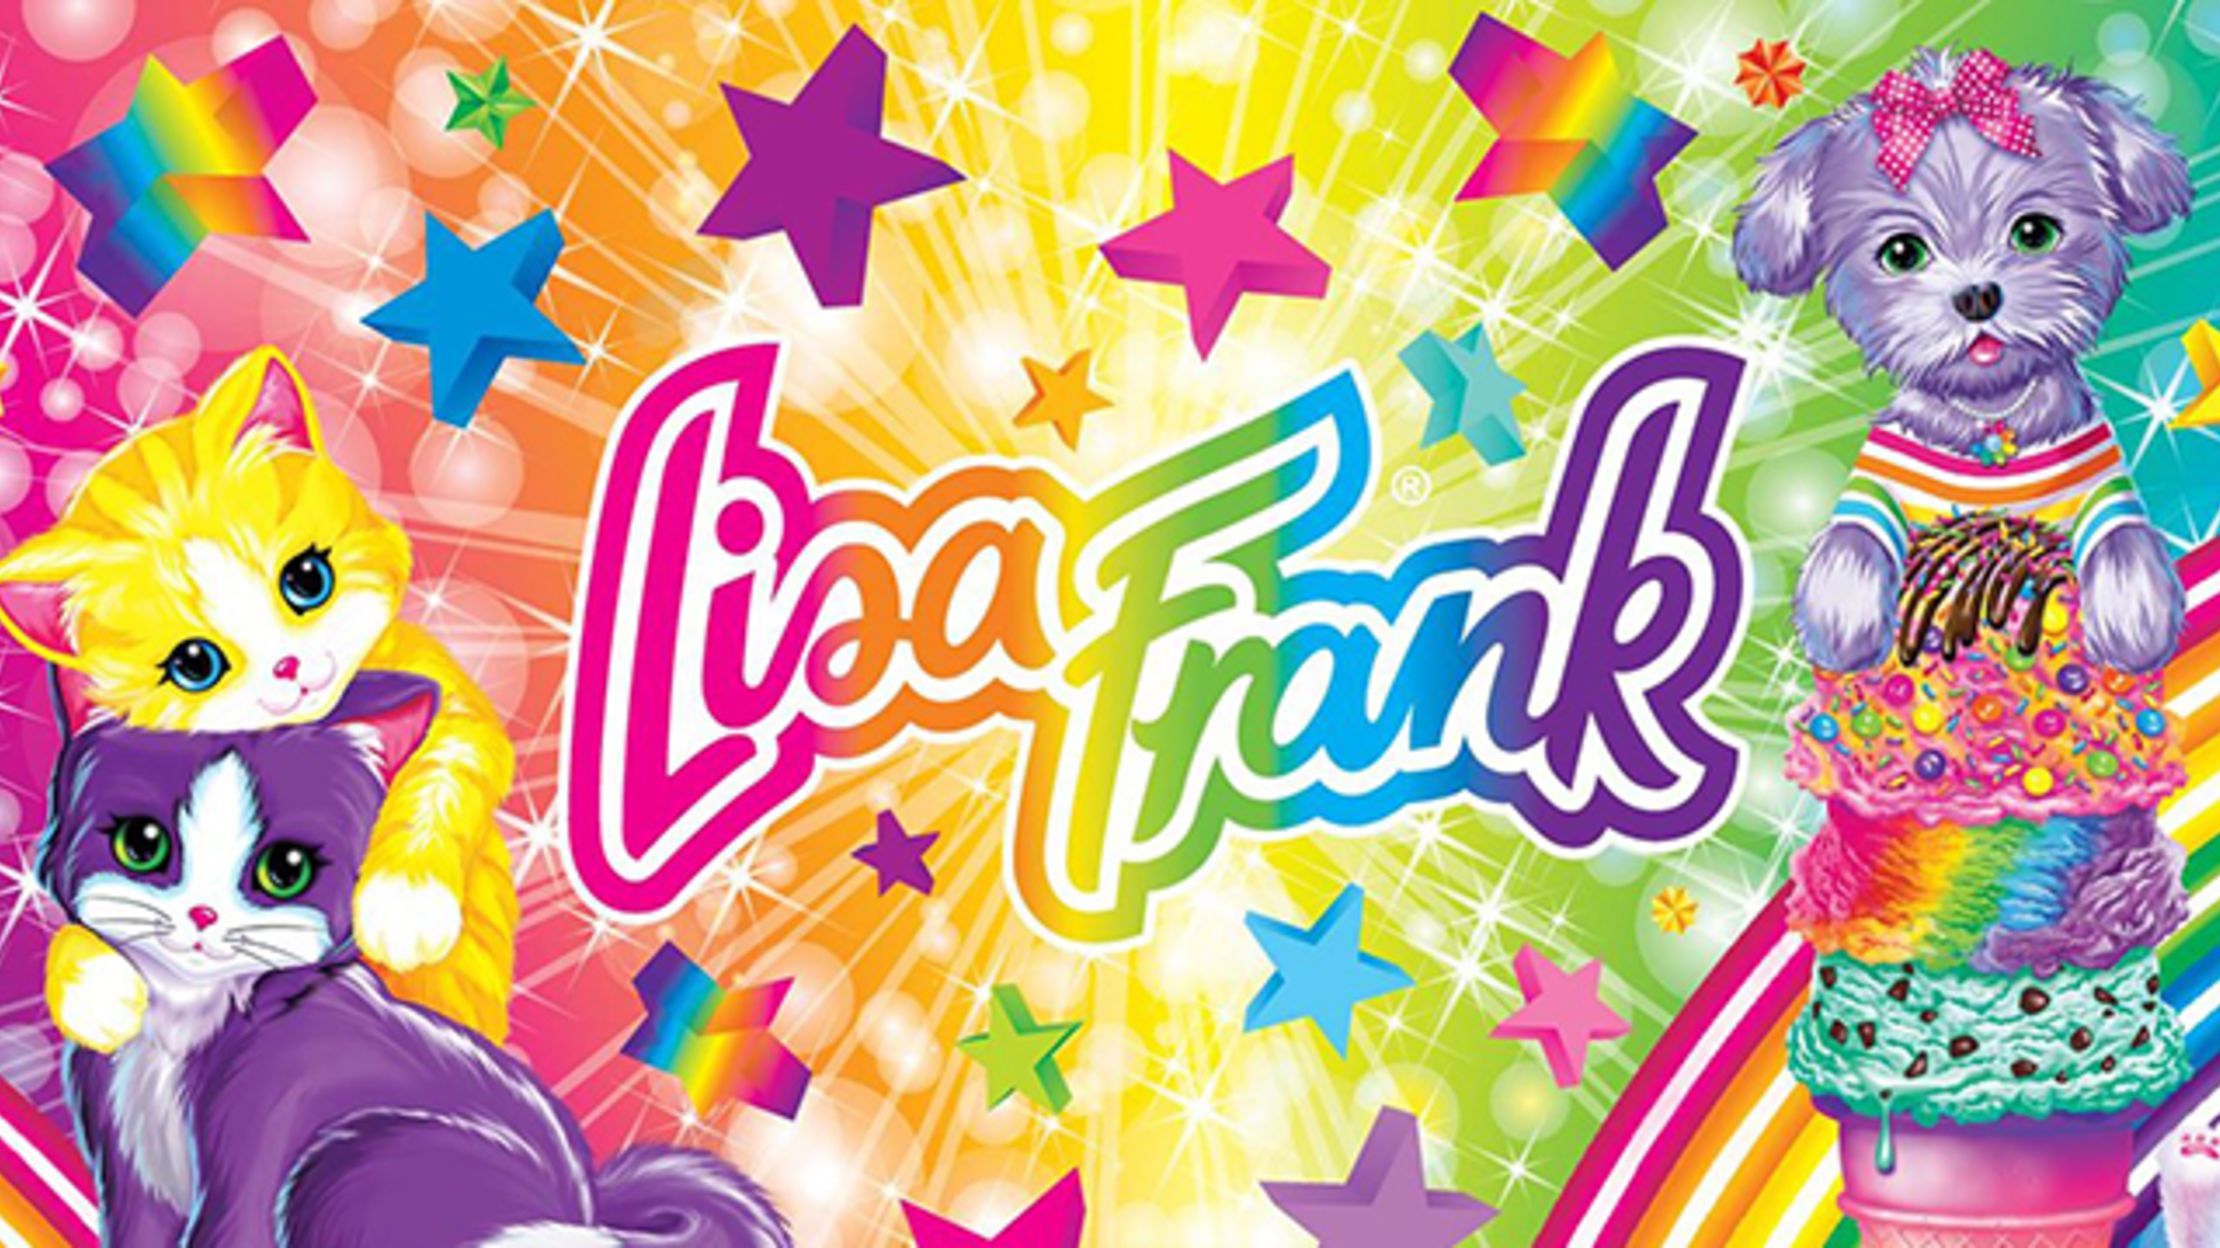 17 Bright and Colorful Facts About Lisa Frank | Mental Floss